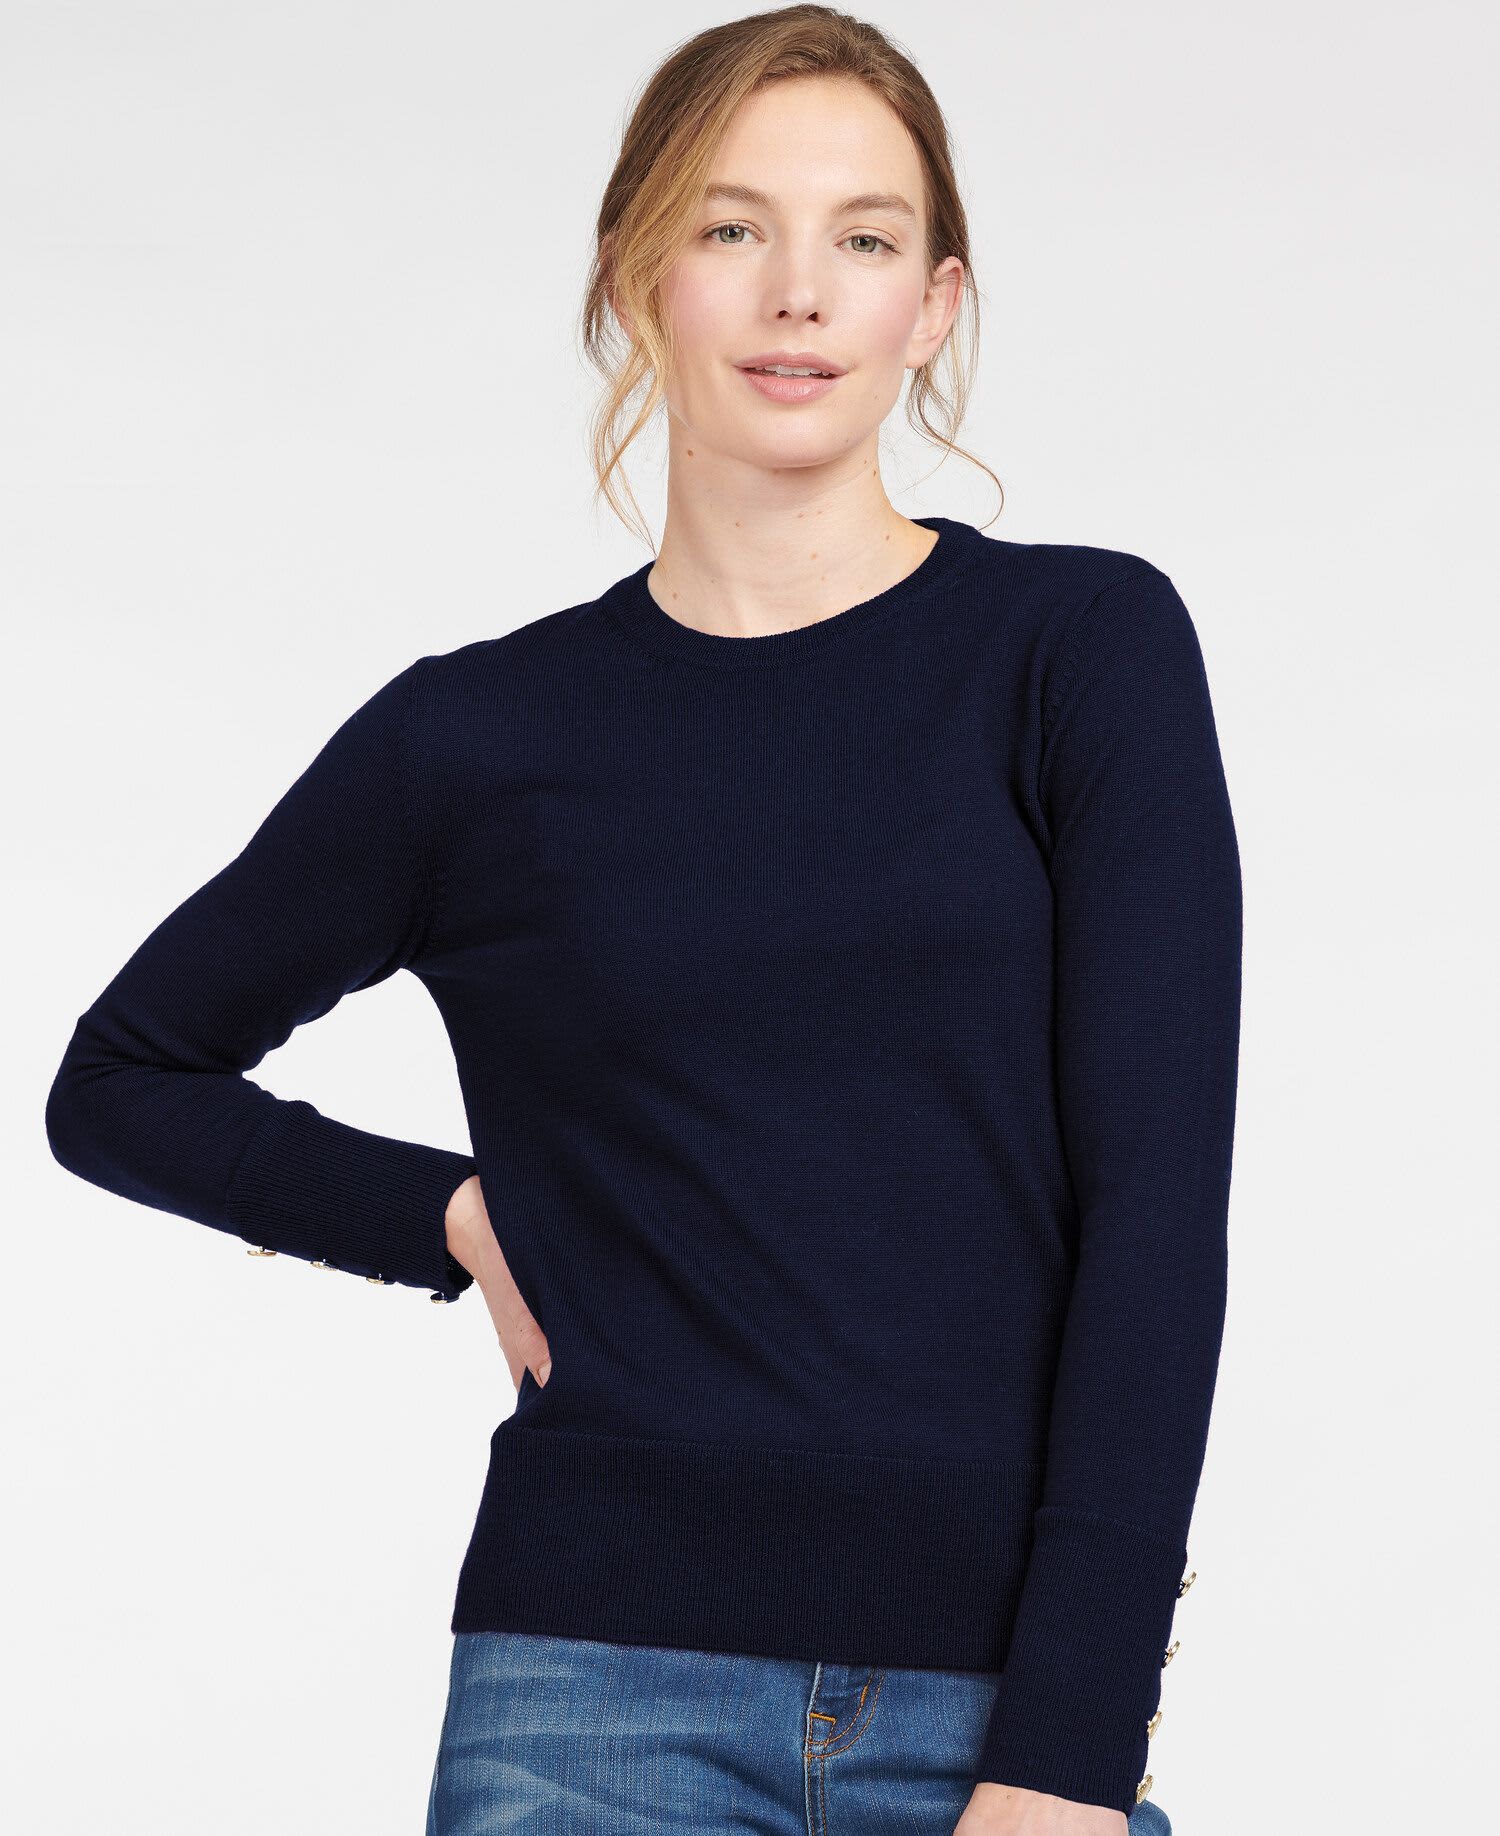 Barbour Ridley Knit Jumper Navy - Fawcetts Online